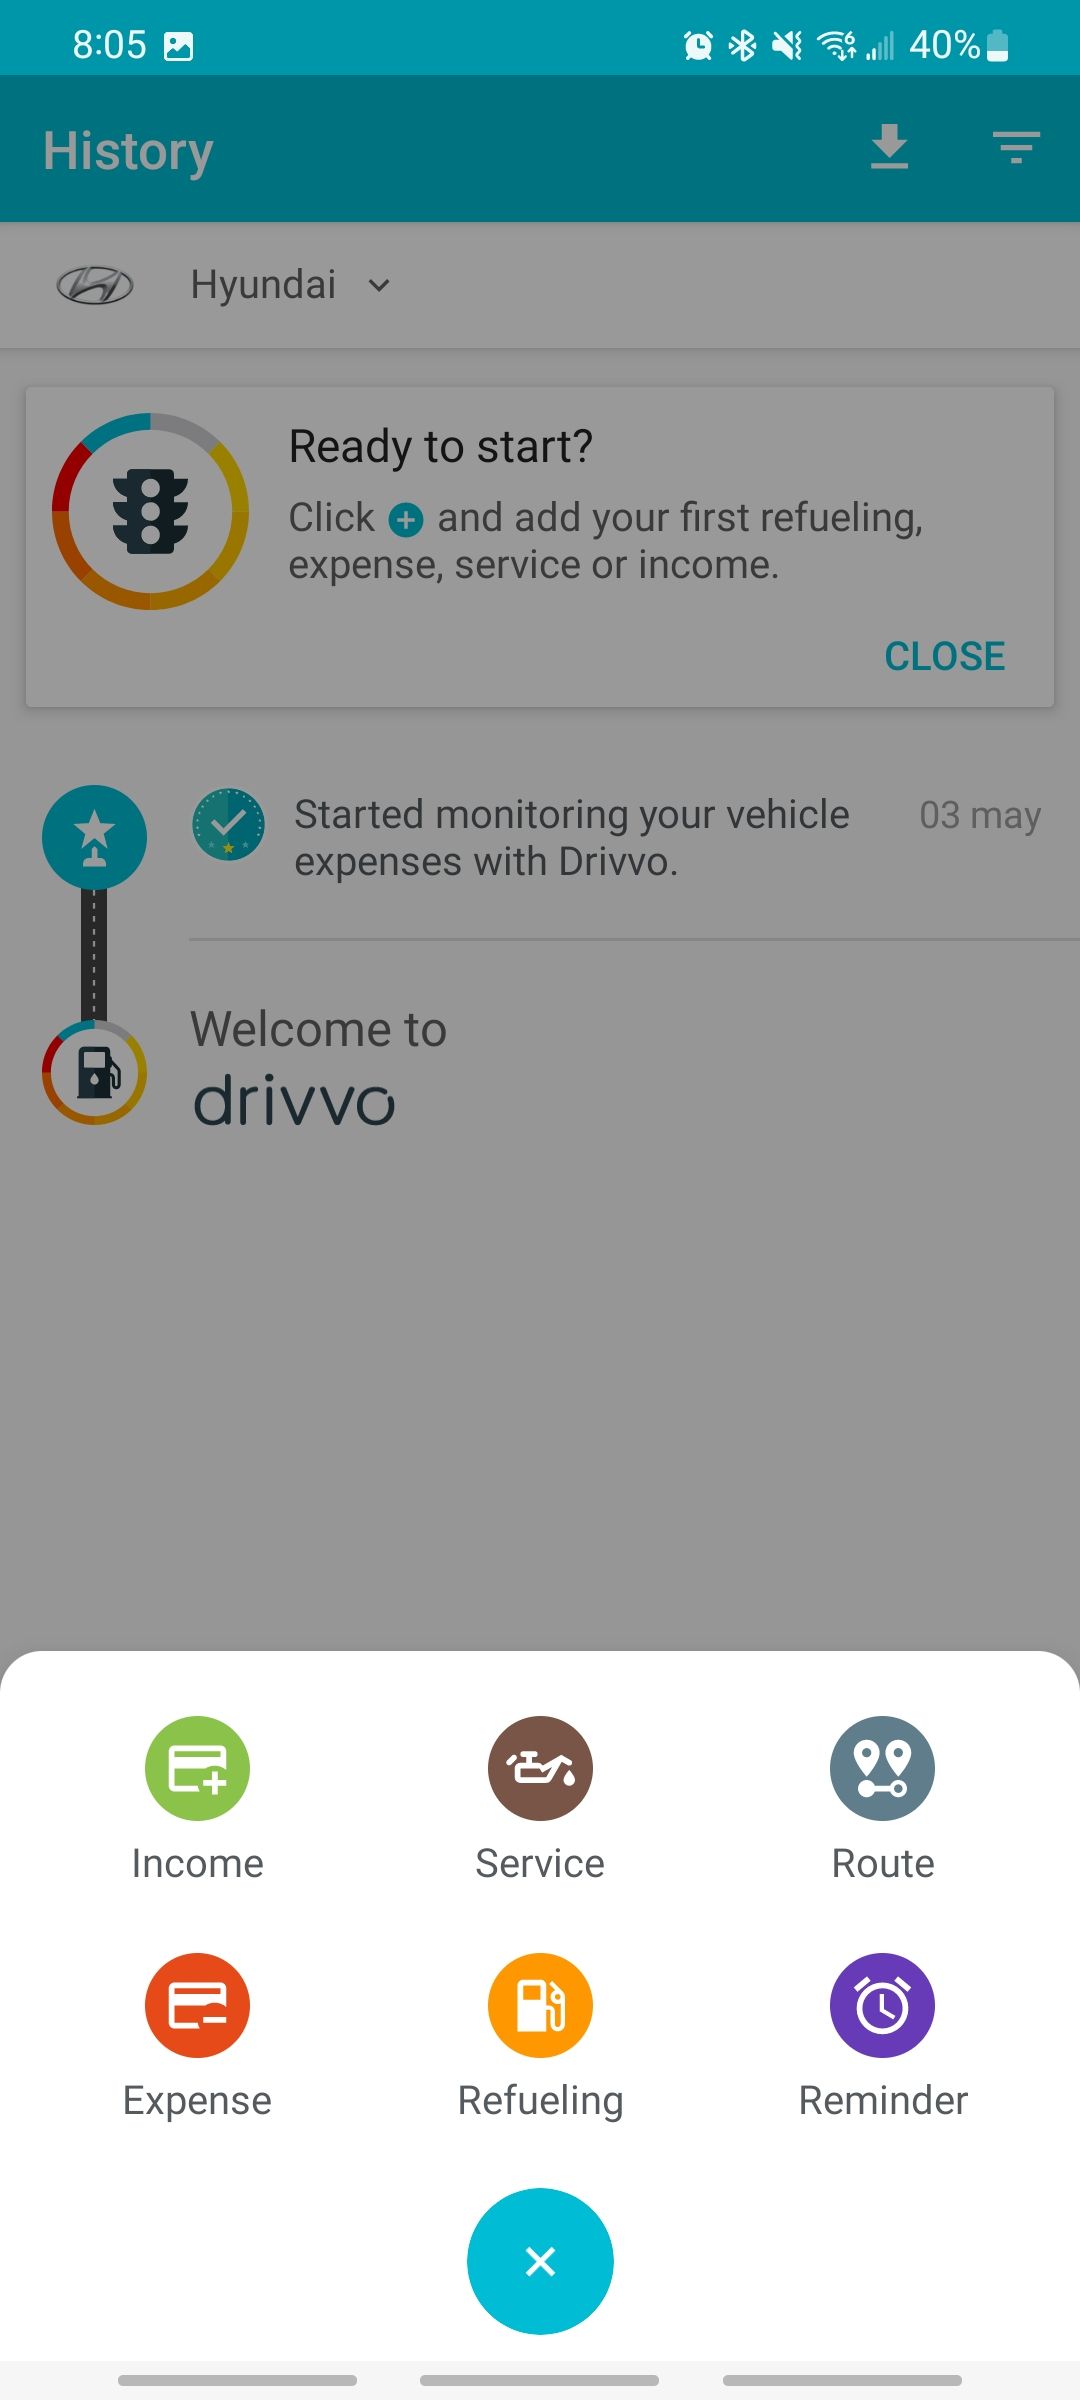 drivvo app quick buttons on the home screen